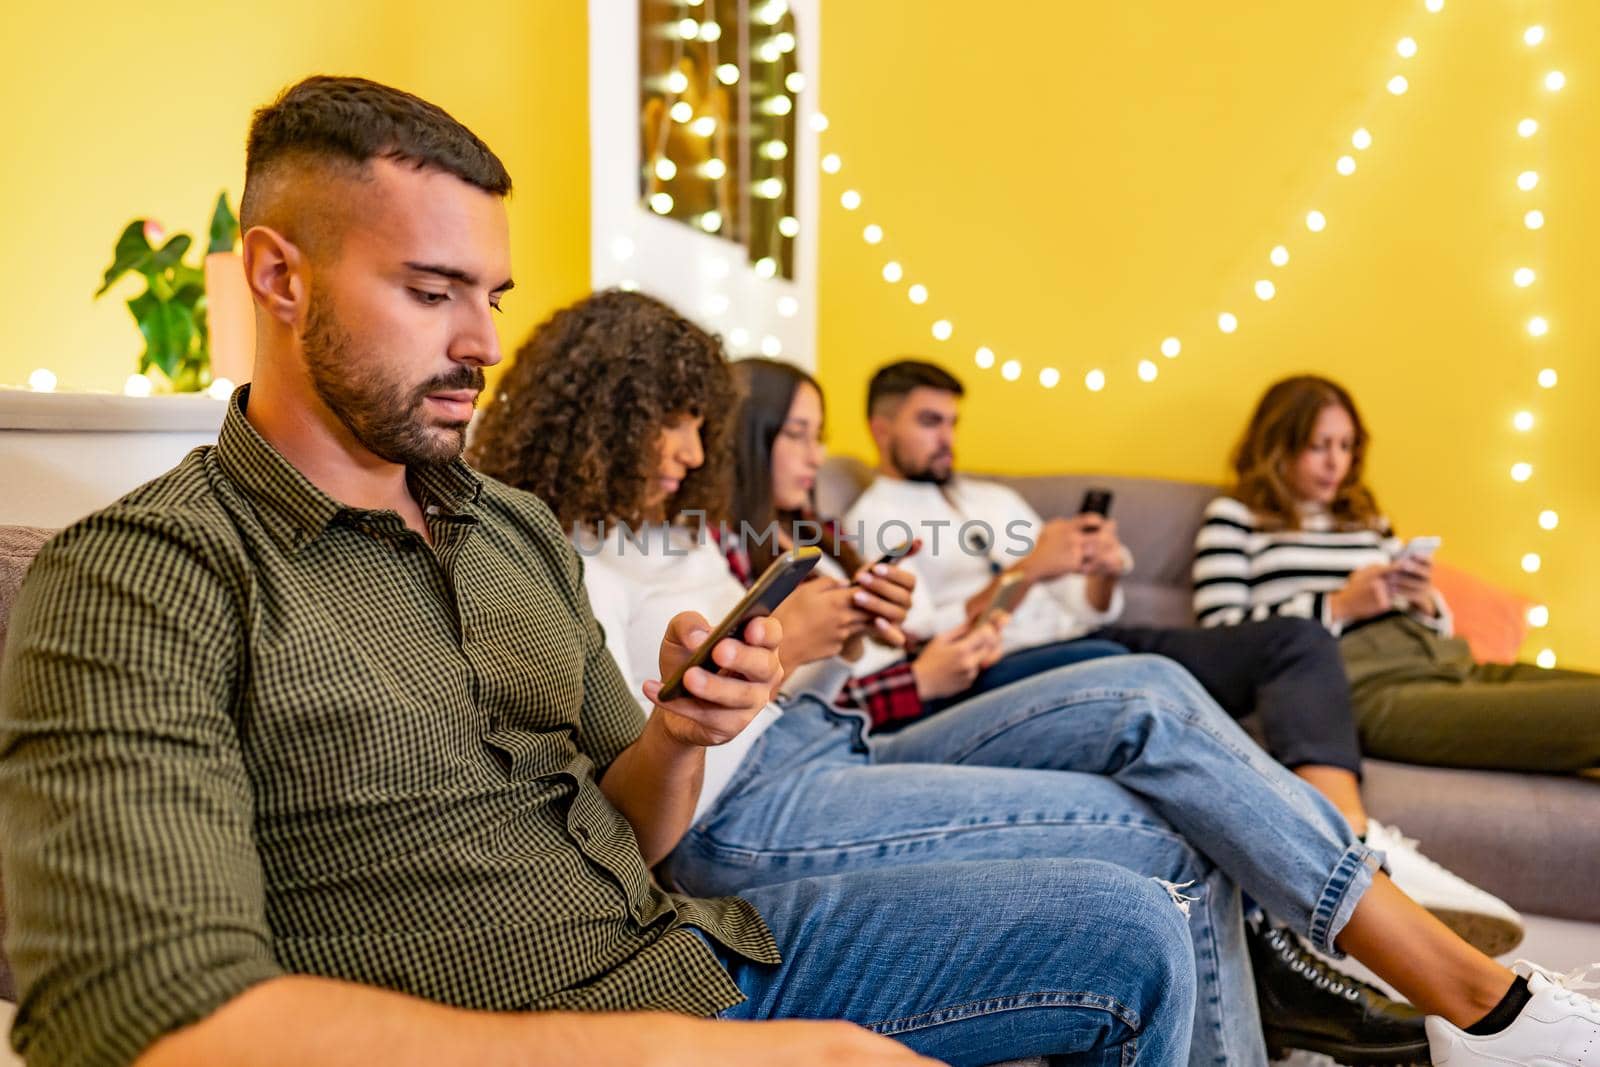 Group of serious young student friends at home sitting on the couch spend time using smartphones without real interaction between them. New social and human habits due to internet mobile technology by robbyfontanesi